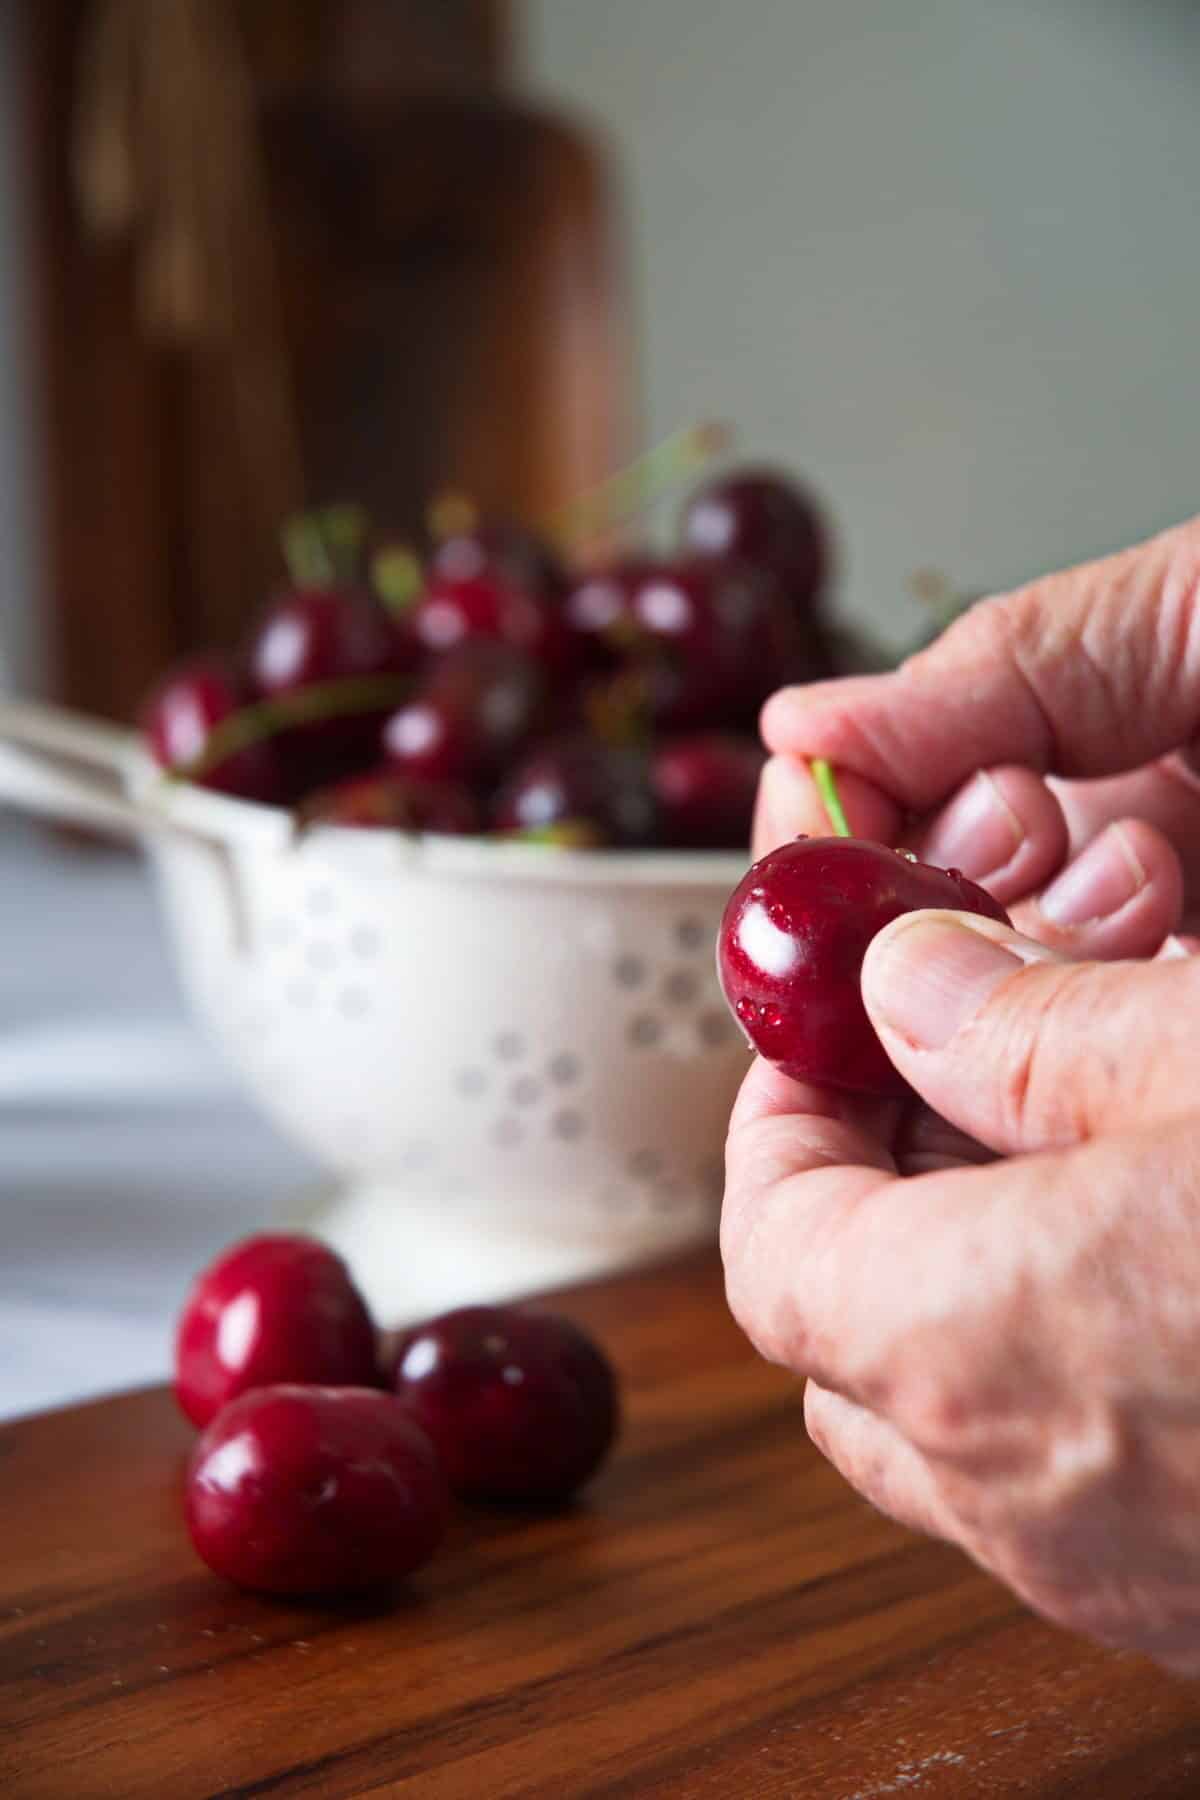 A woman's hand holding a cherry.